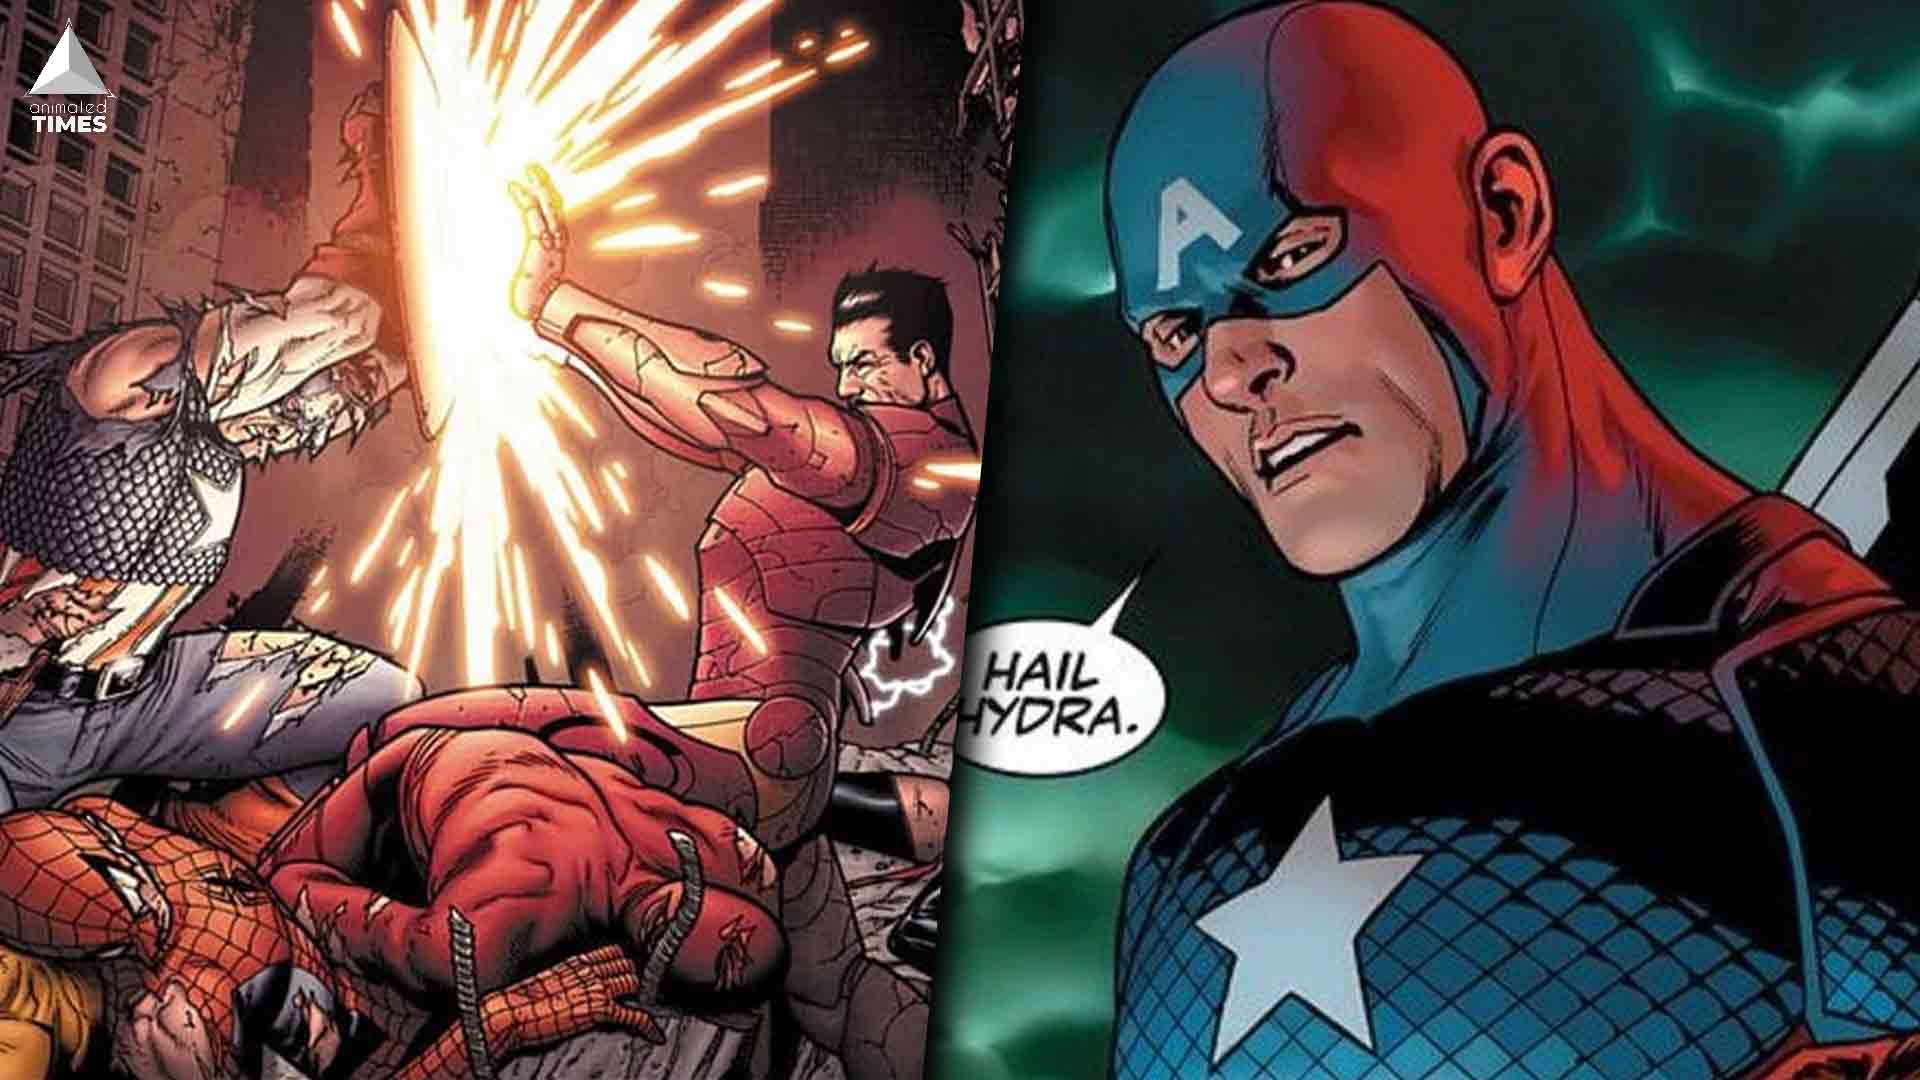 Not My Captain America 10 Darkest Moments To Make You Hate The Super Soldier